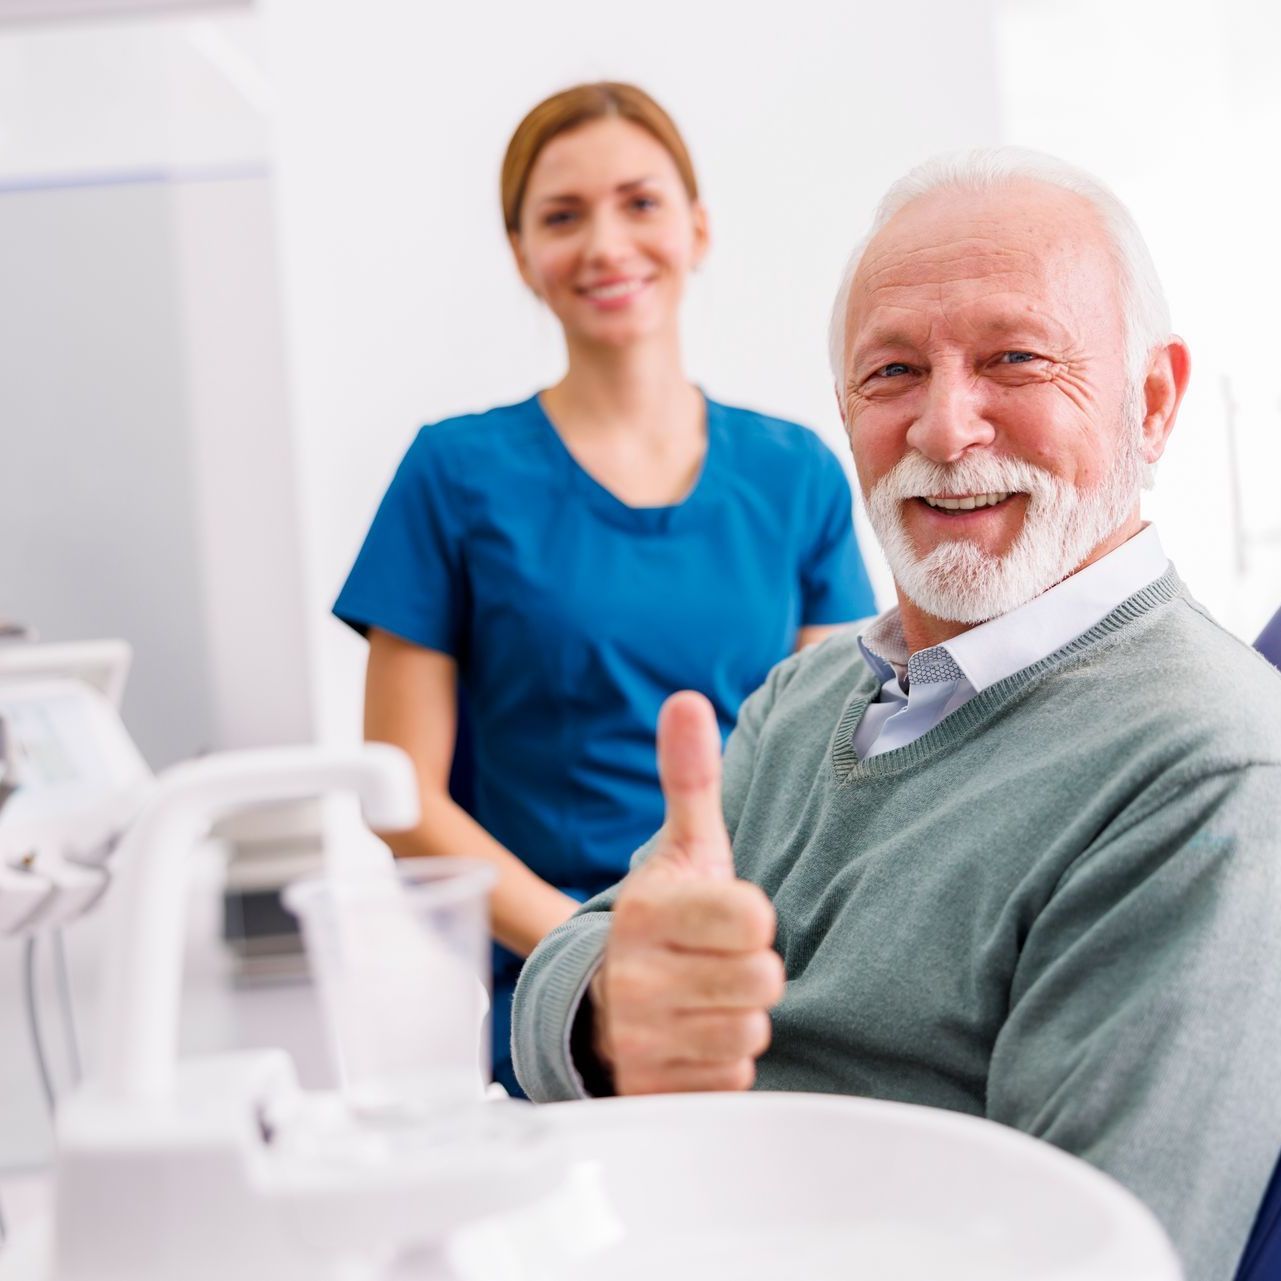 An elderly man is giving a thumbs up in a dental chair.